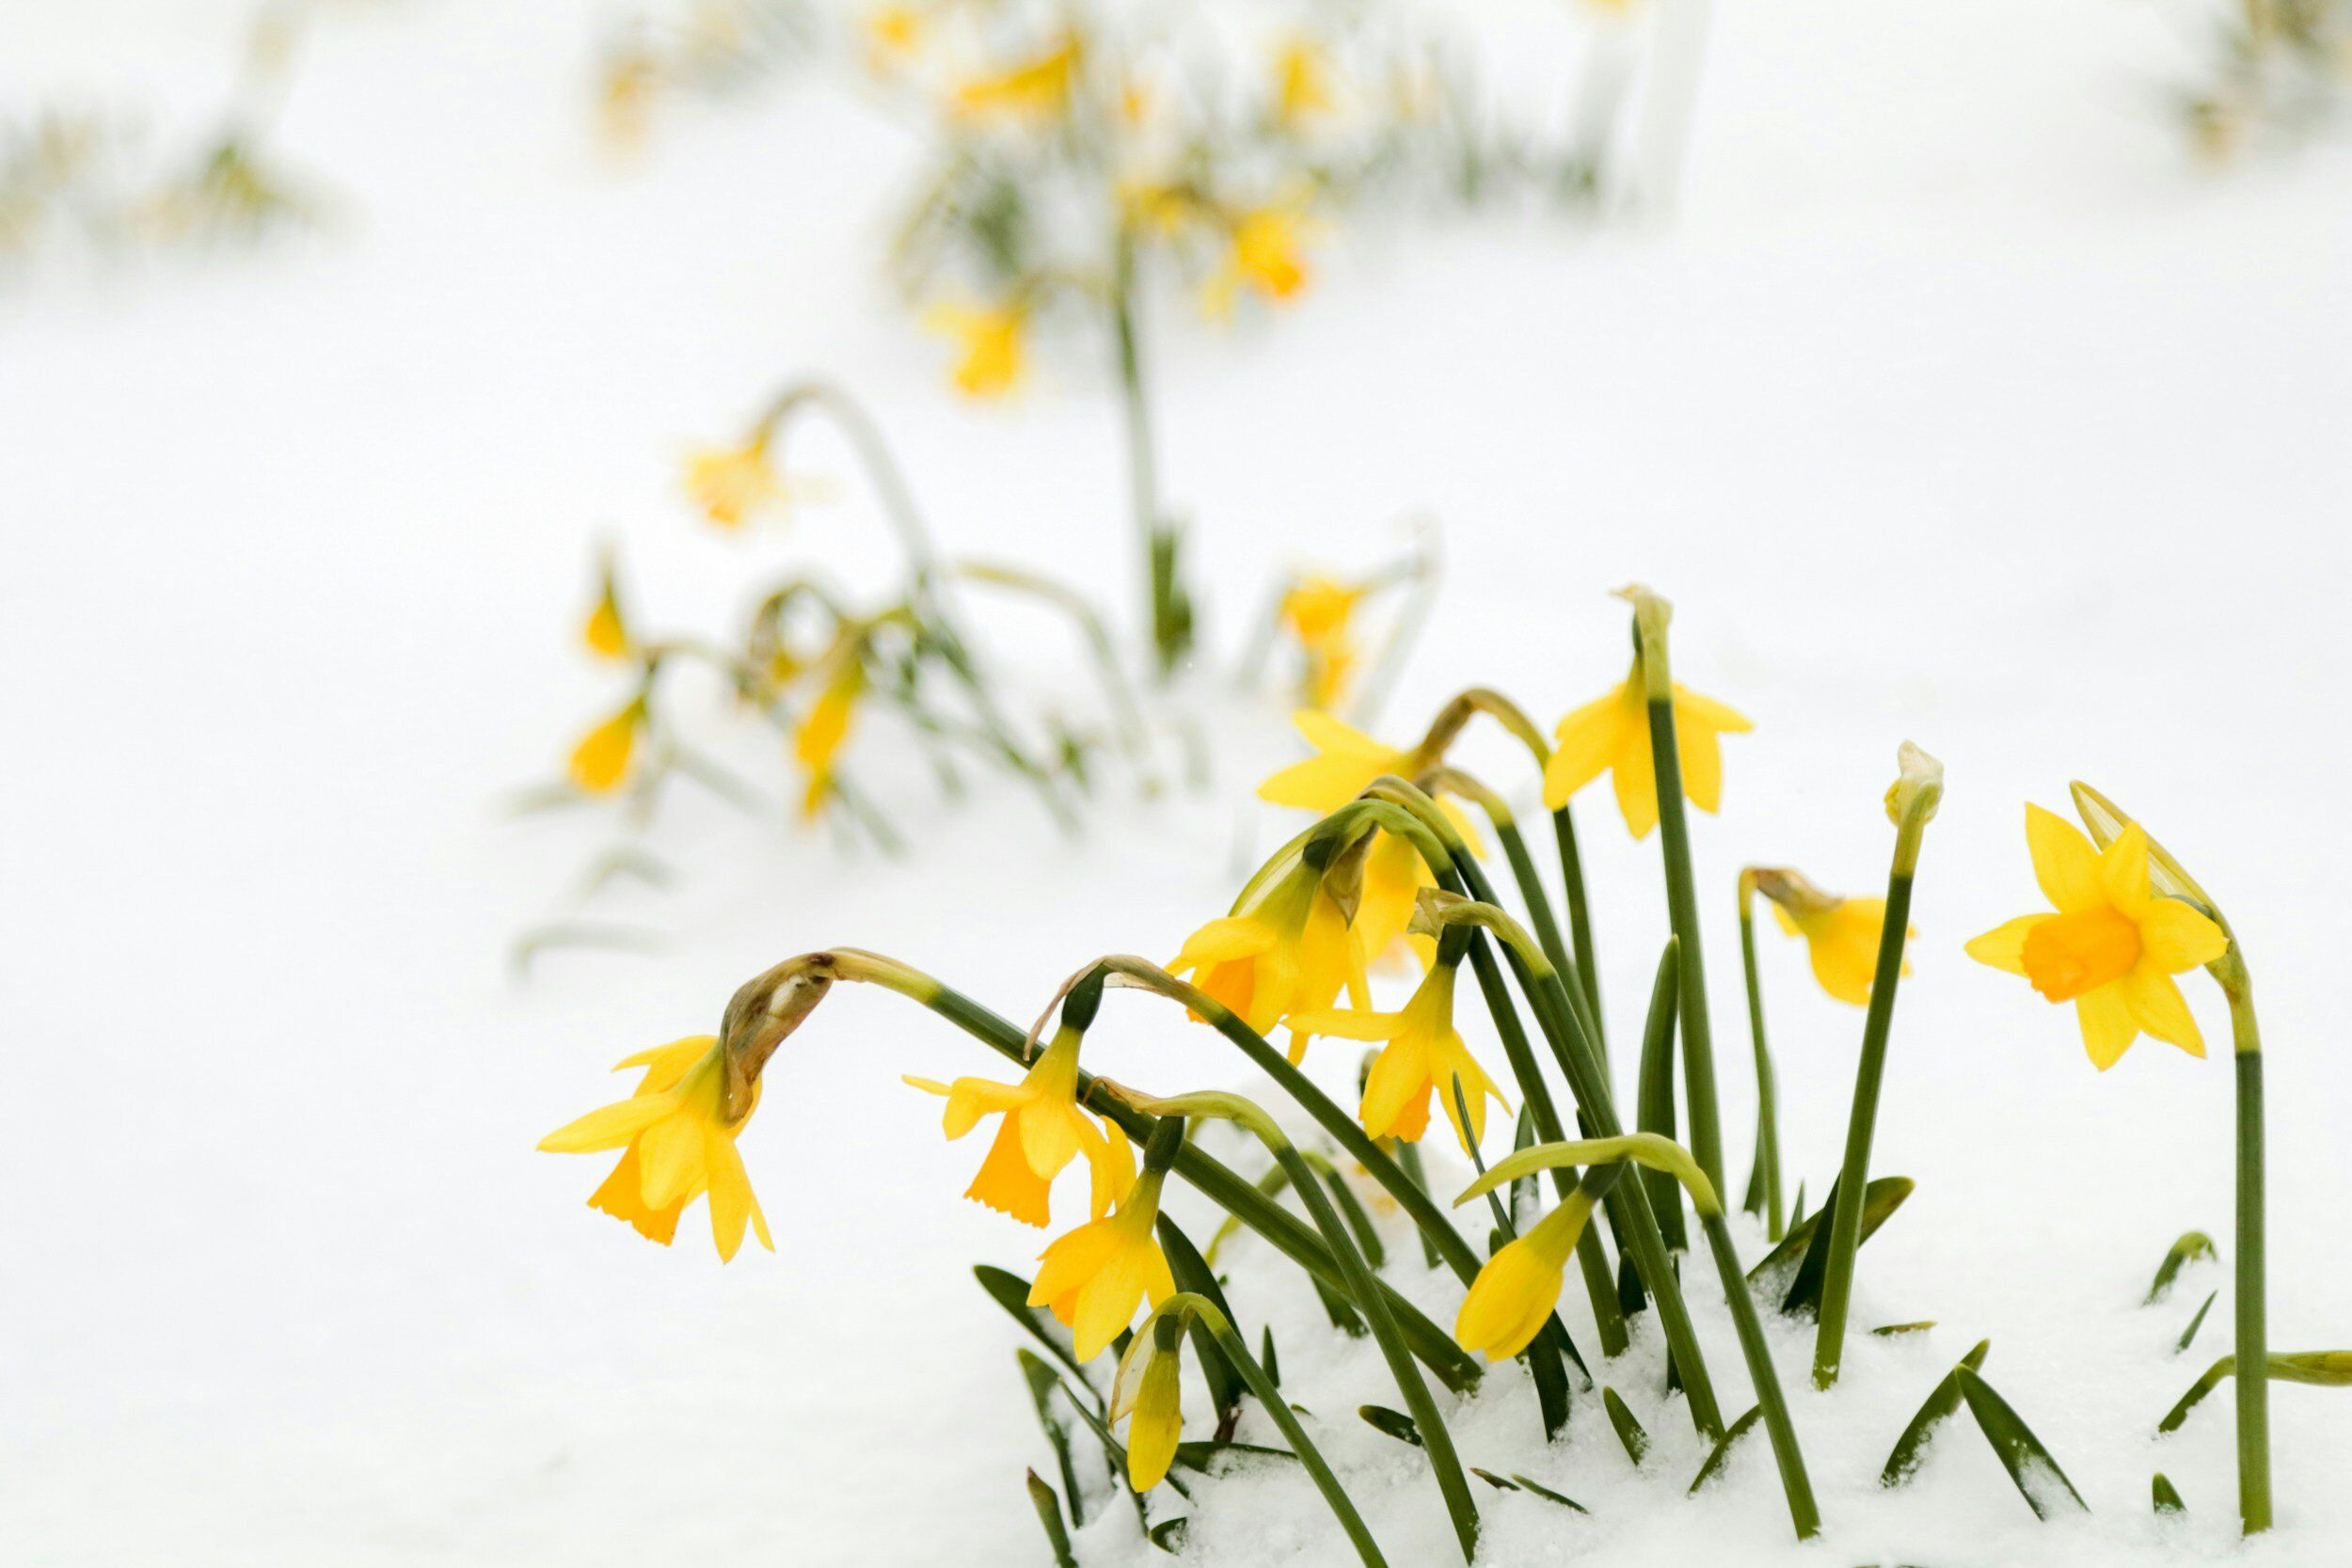 flowers growing out of the snow